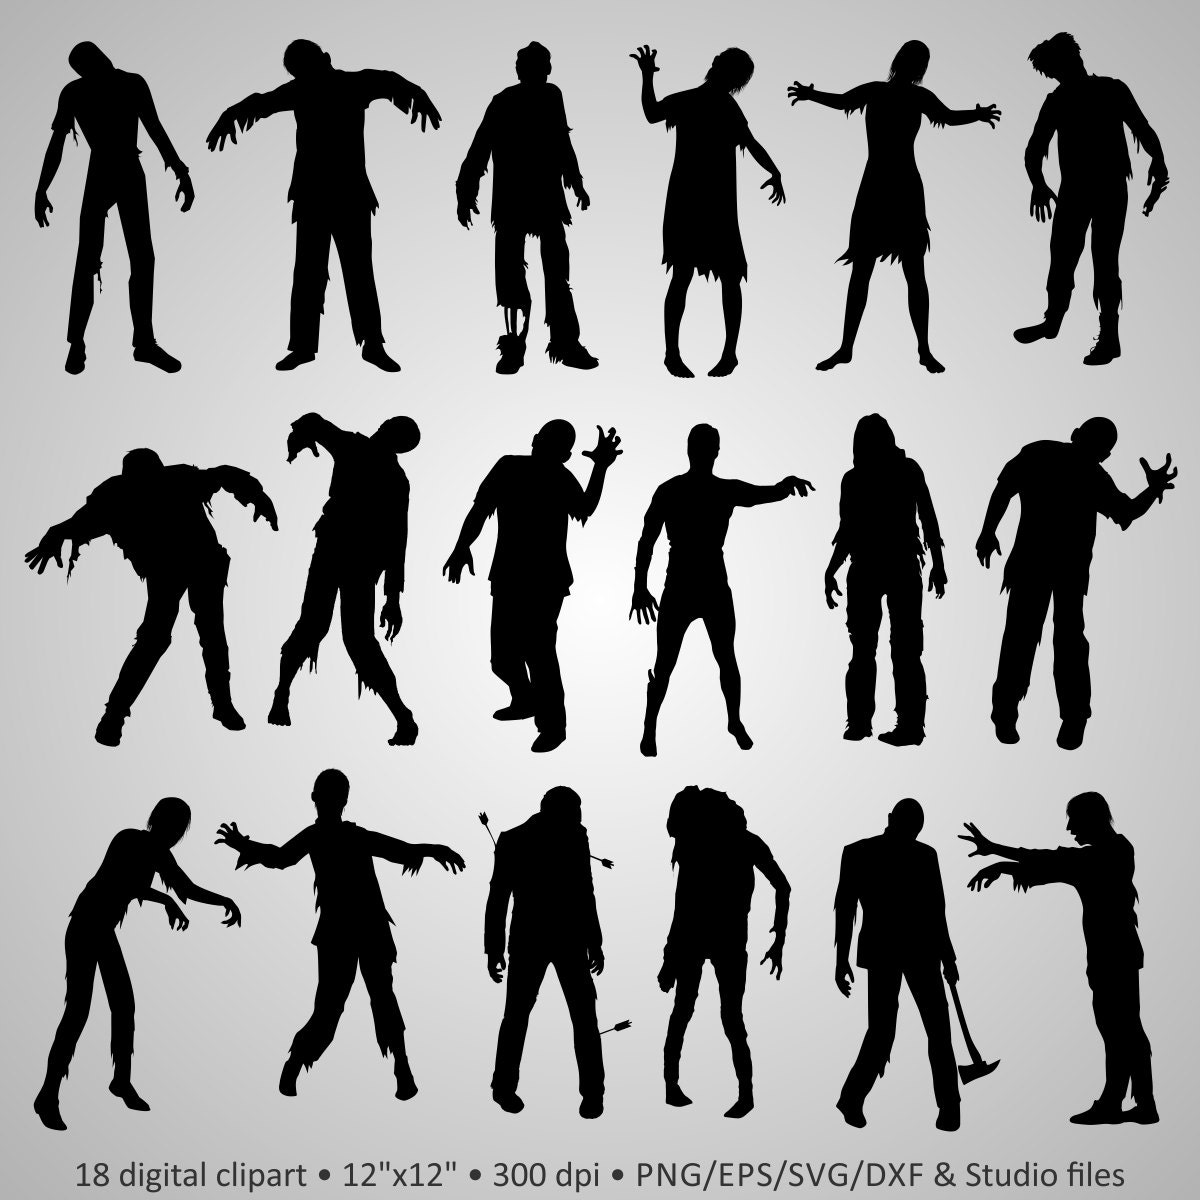 Download Buy 2 Get 1 Free Digital Clipart Zombie Silhouettes walking